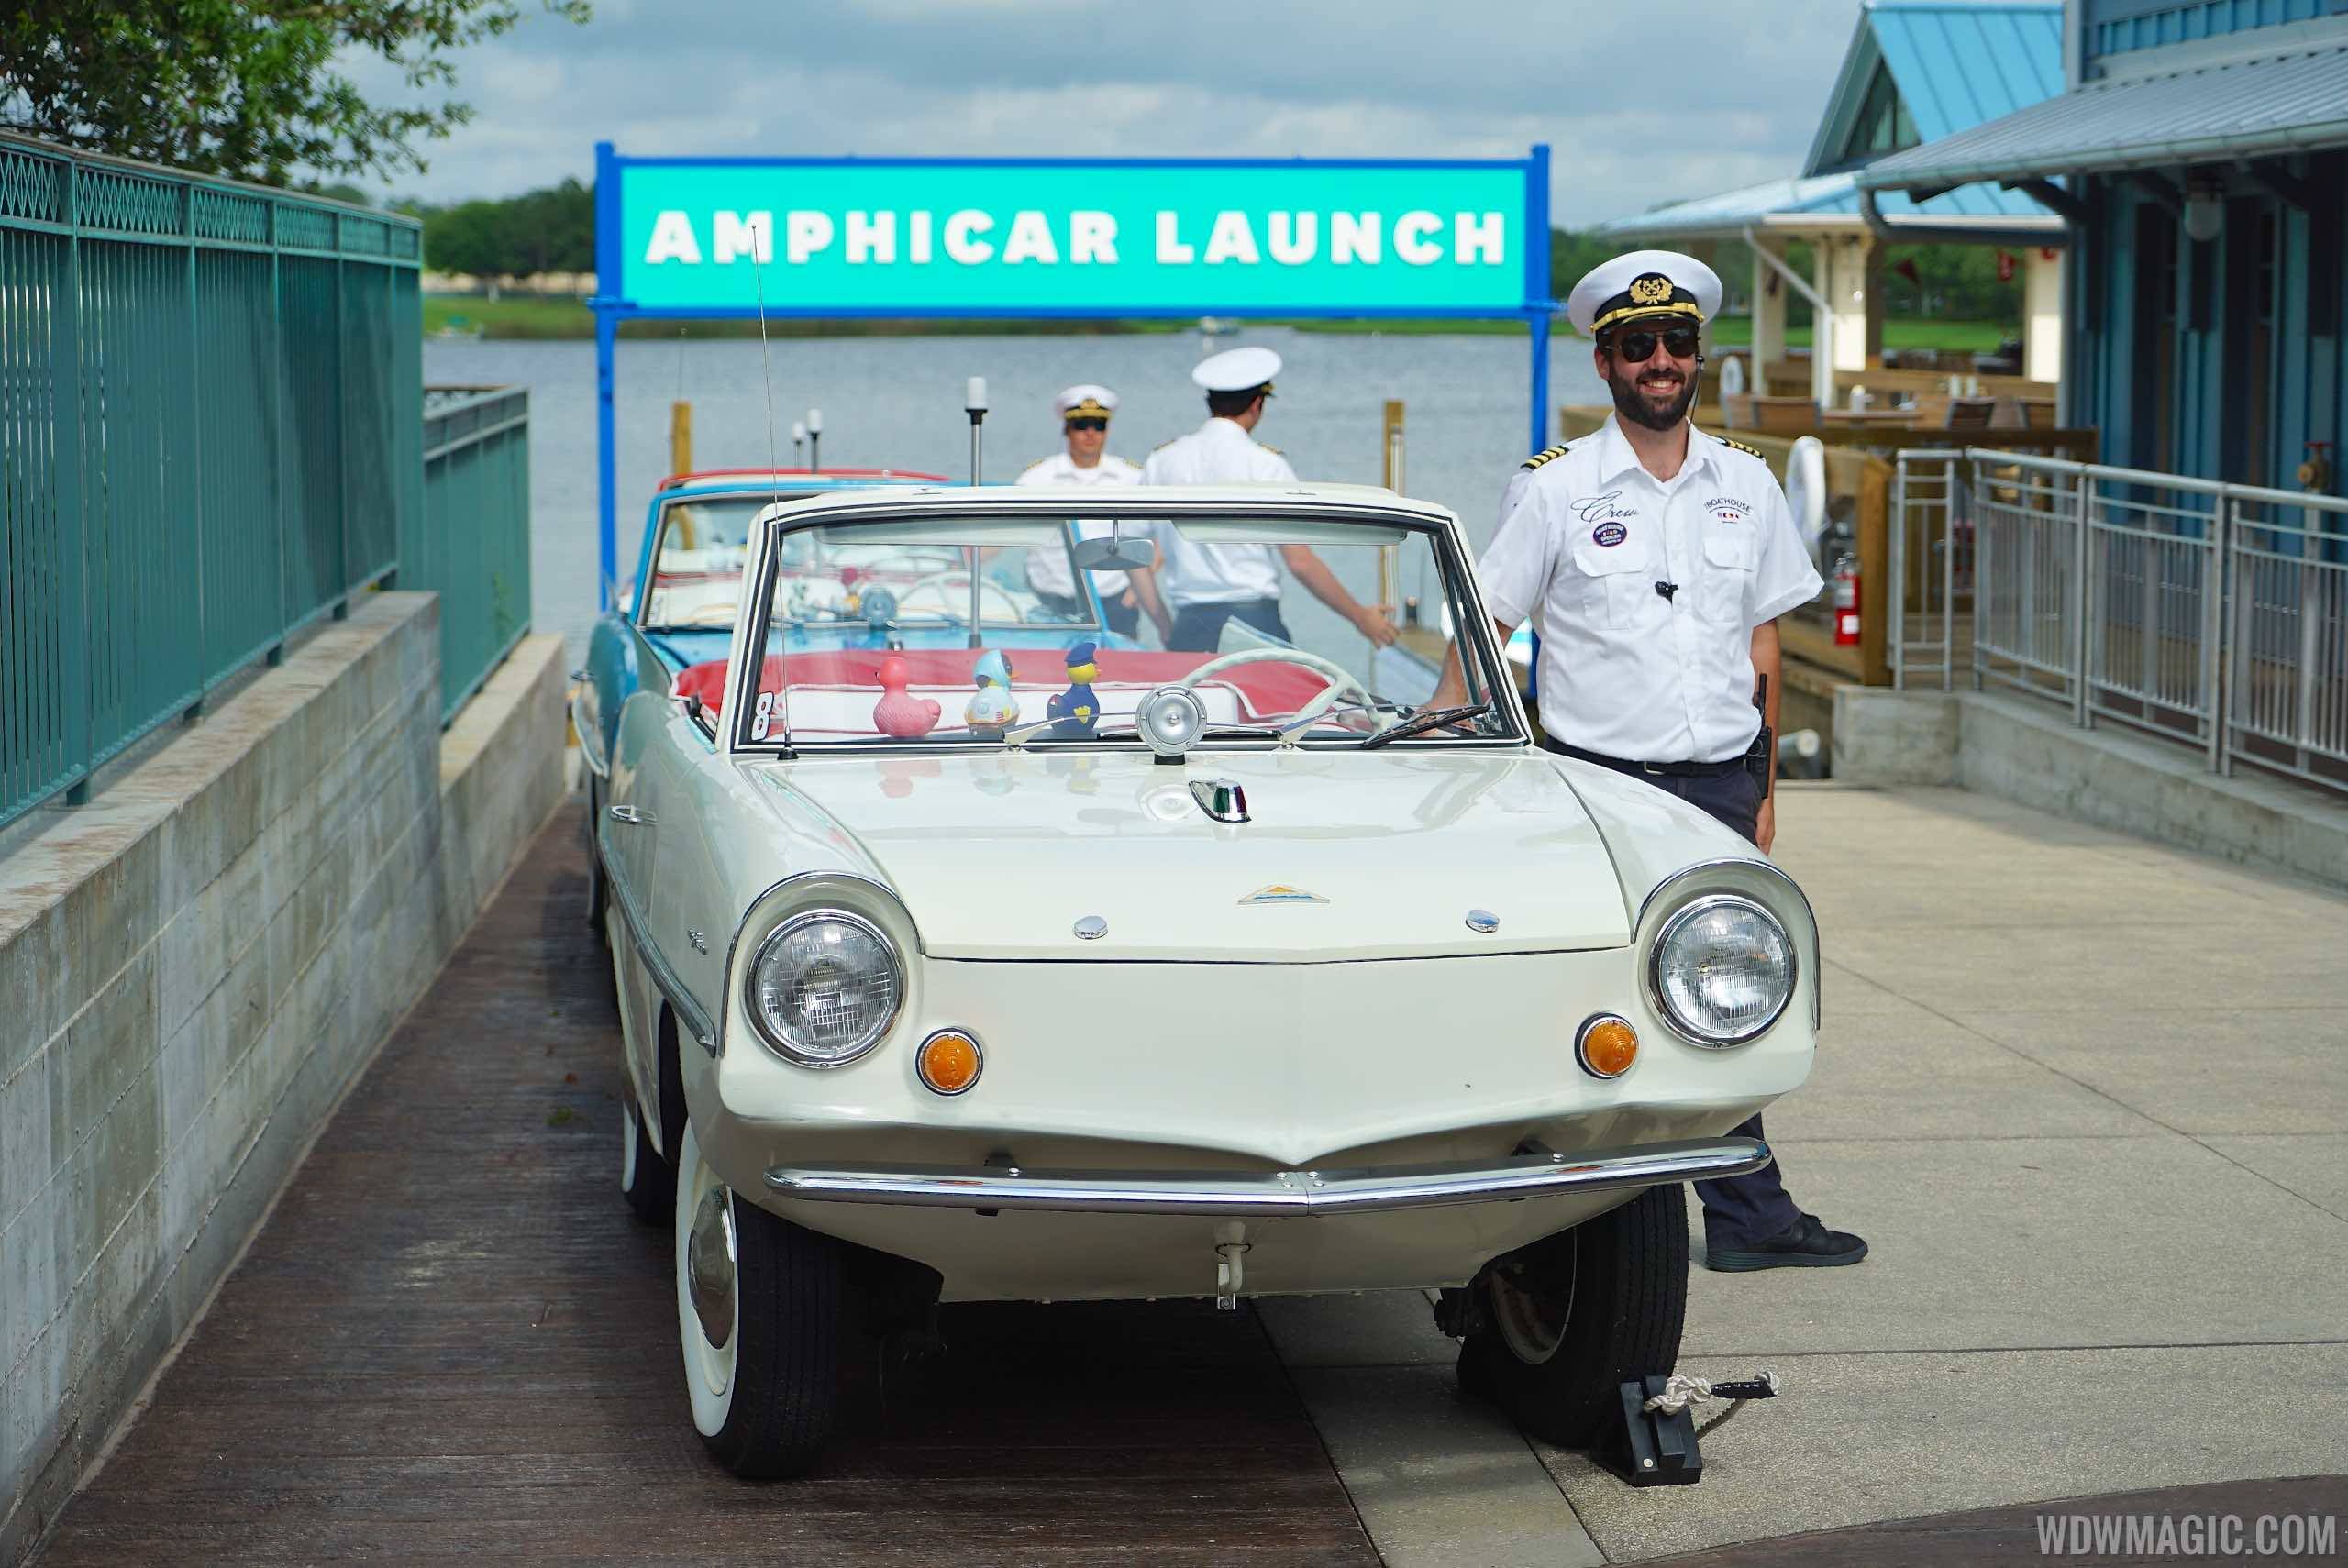 Opening date and amphicar pricing set for The BOATHOUSE at Disney Springs